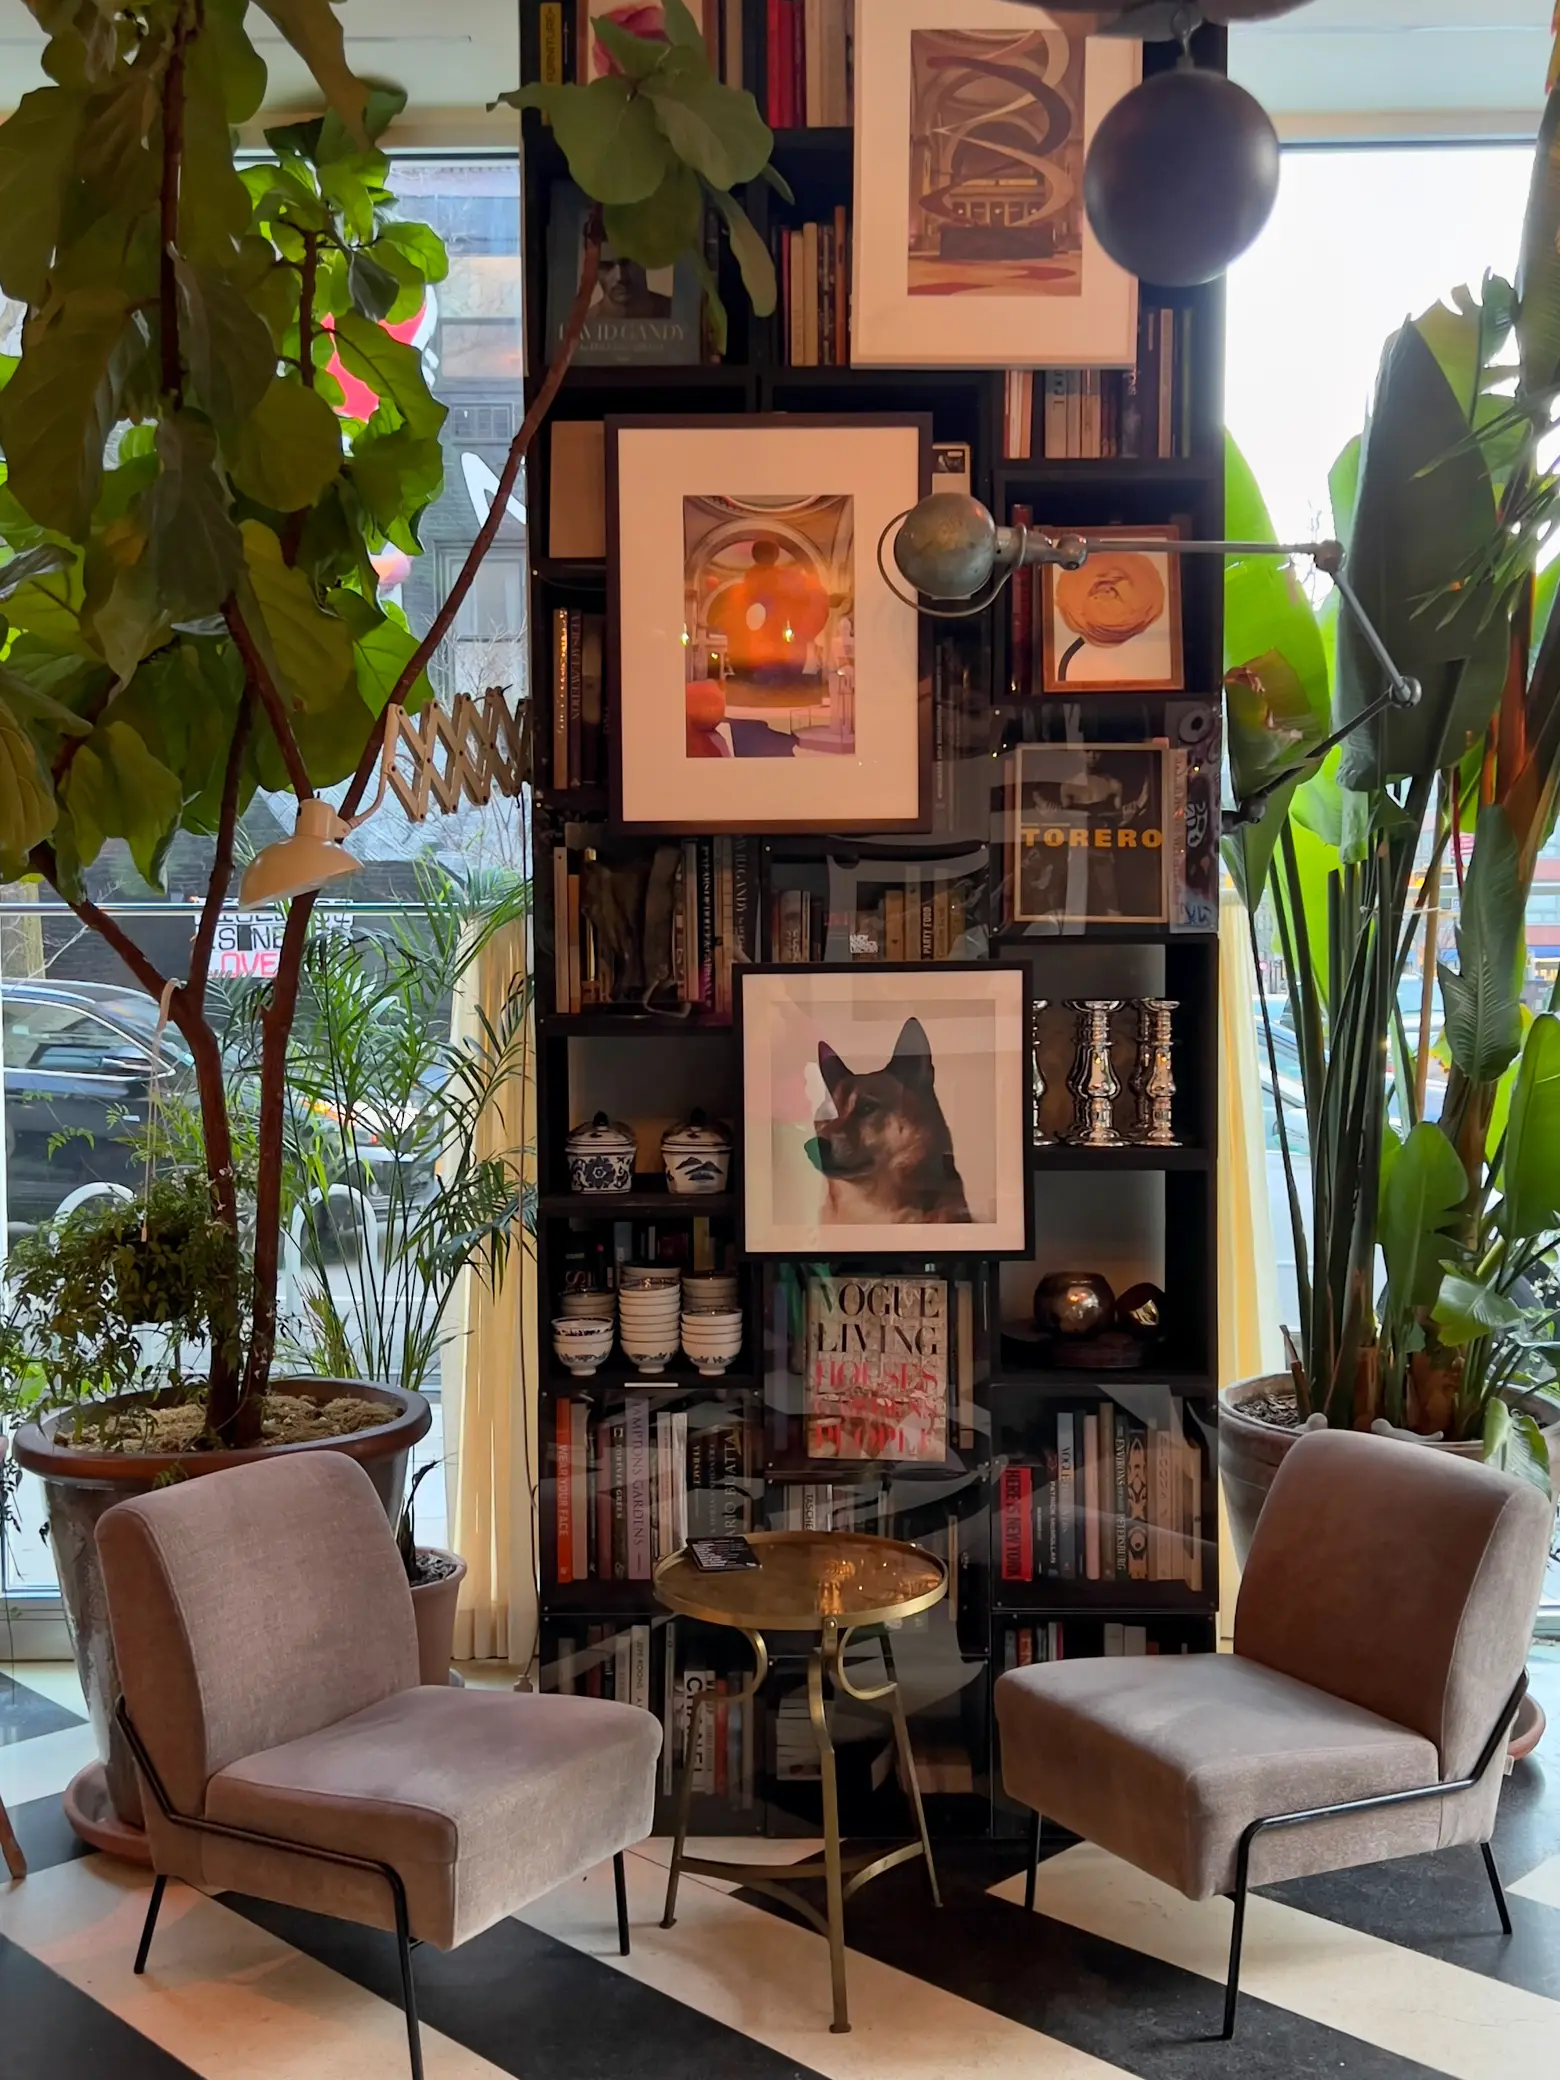  A bookshelf with books and a picture of a dog on it.